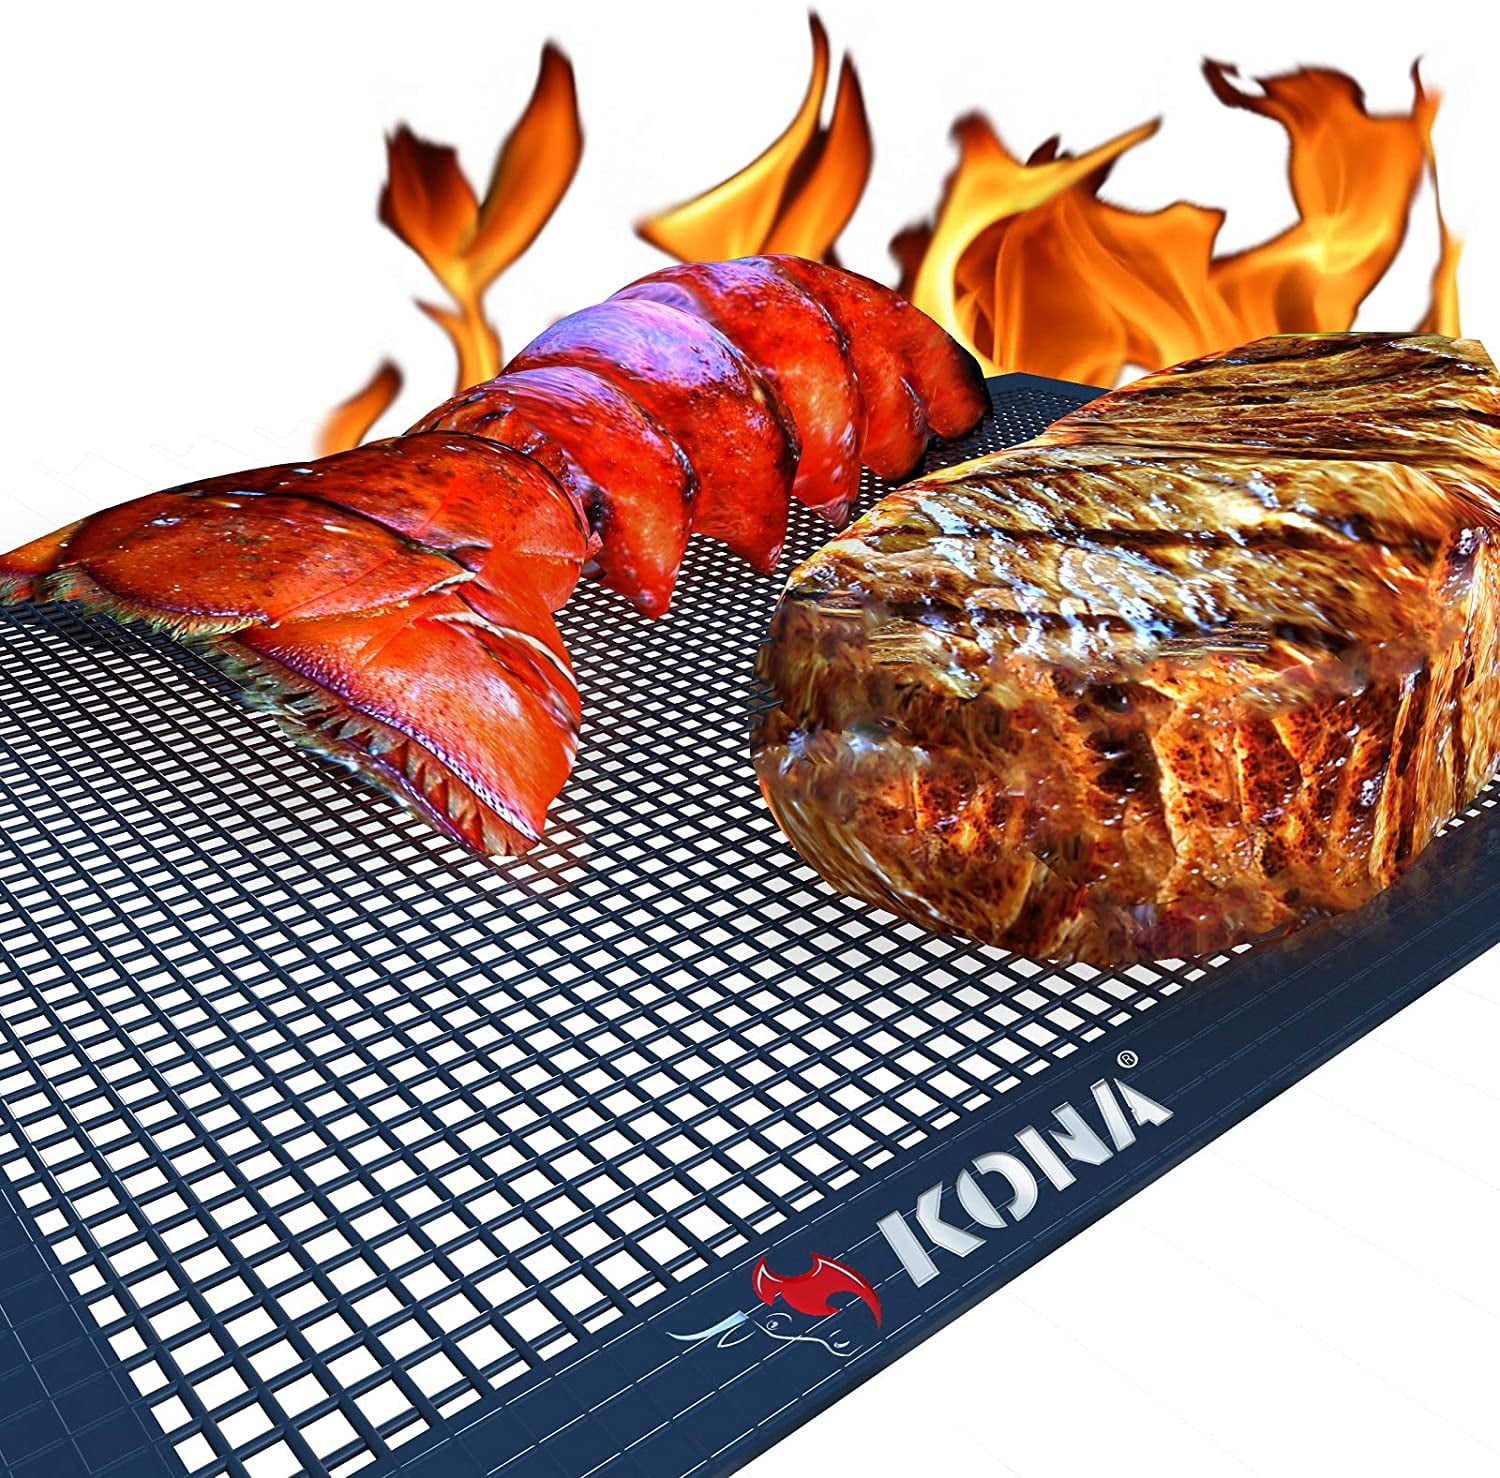 BLACK Professional Grill Mat-Reusable and Heat Resistant BBQ Grill Mat,16 x 13 Inch Barbecue Grill Mats Set of 3 Heavy Duty Non-stick for Ribs Shrimps Steaks Burgers Vegetables 